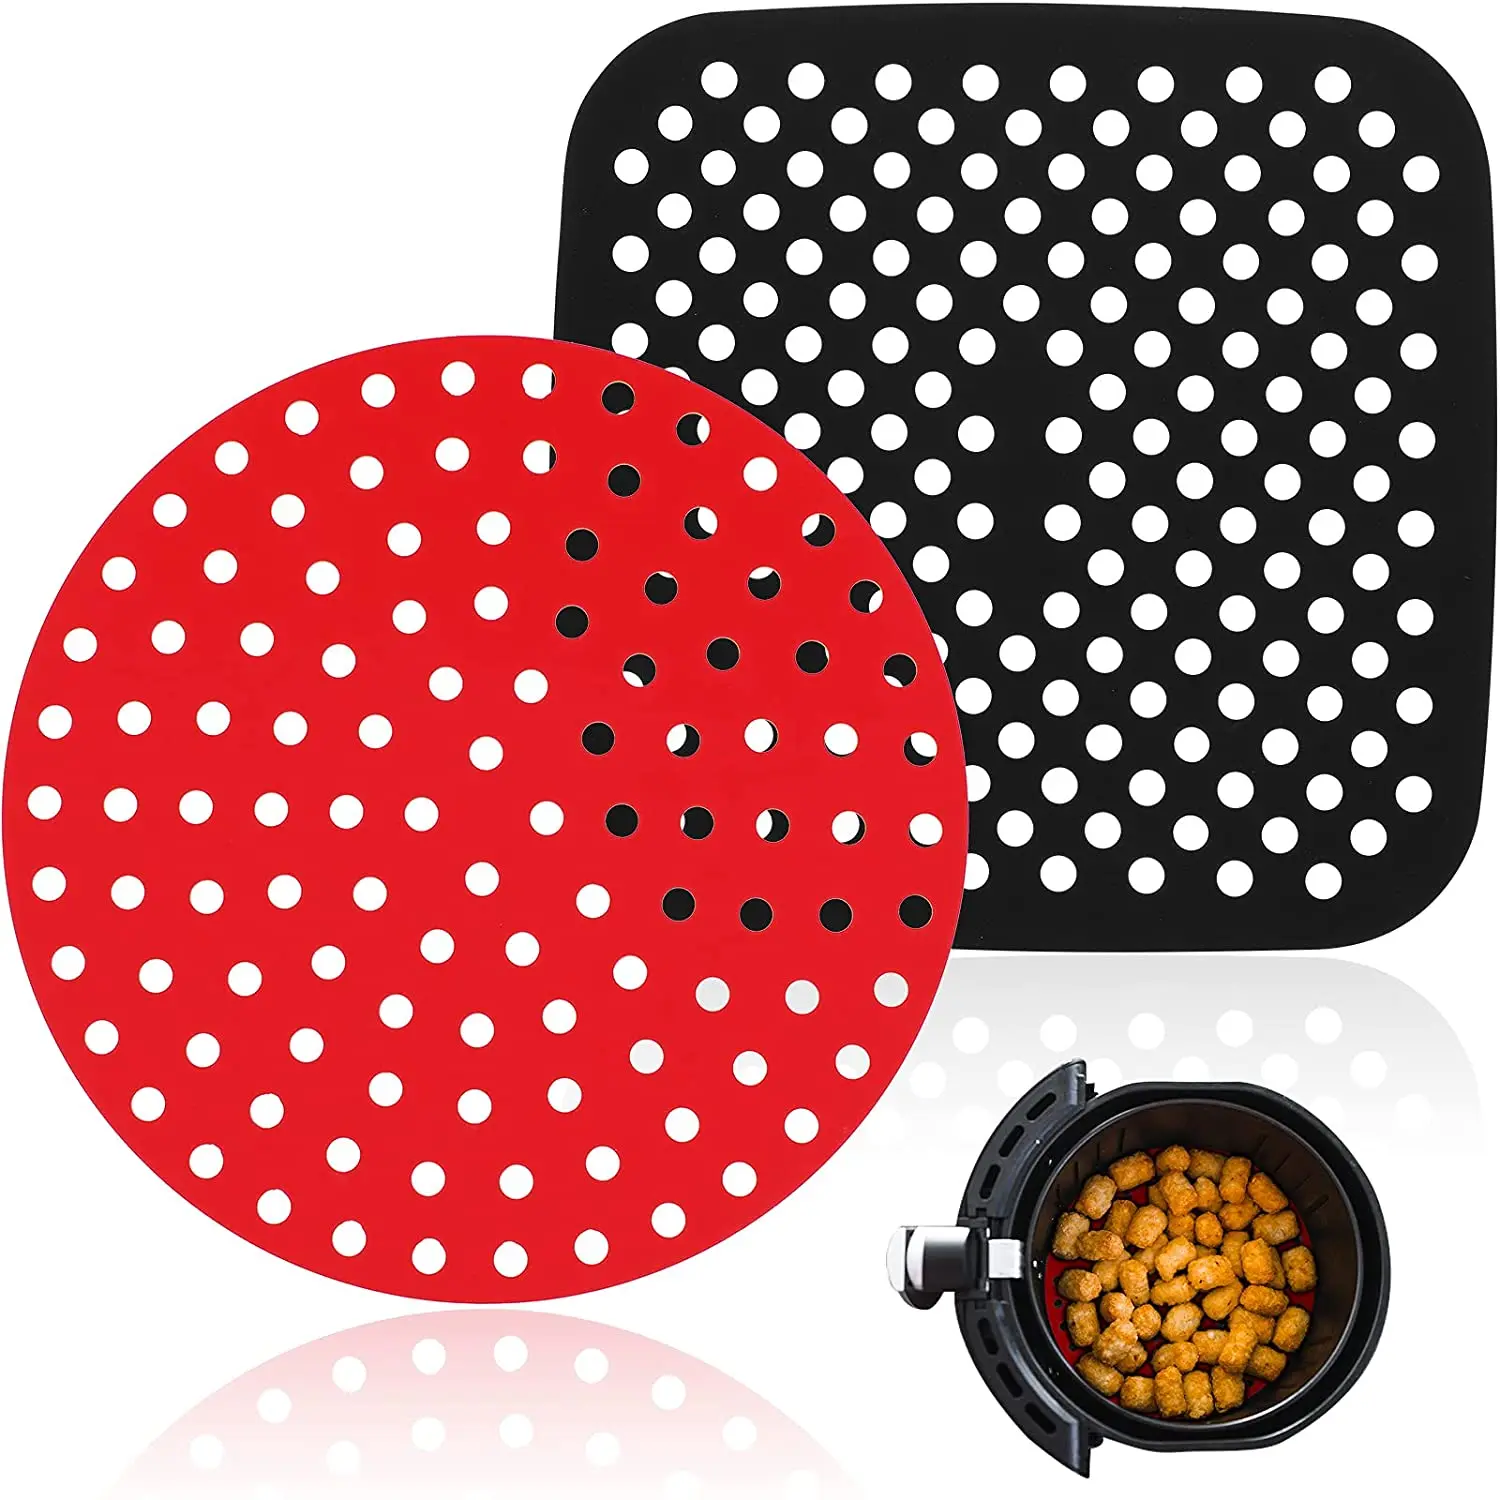 

Reusable Non-stick Round Square Silicone Air Fryer Liners Heat Resistant Anti-slip Food Grade Silicon Air Fryer Mats, Black,red